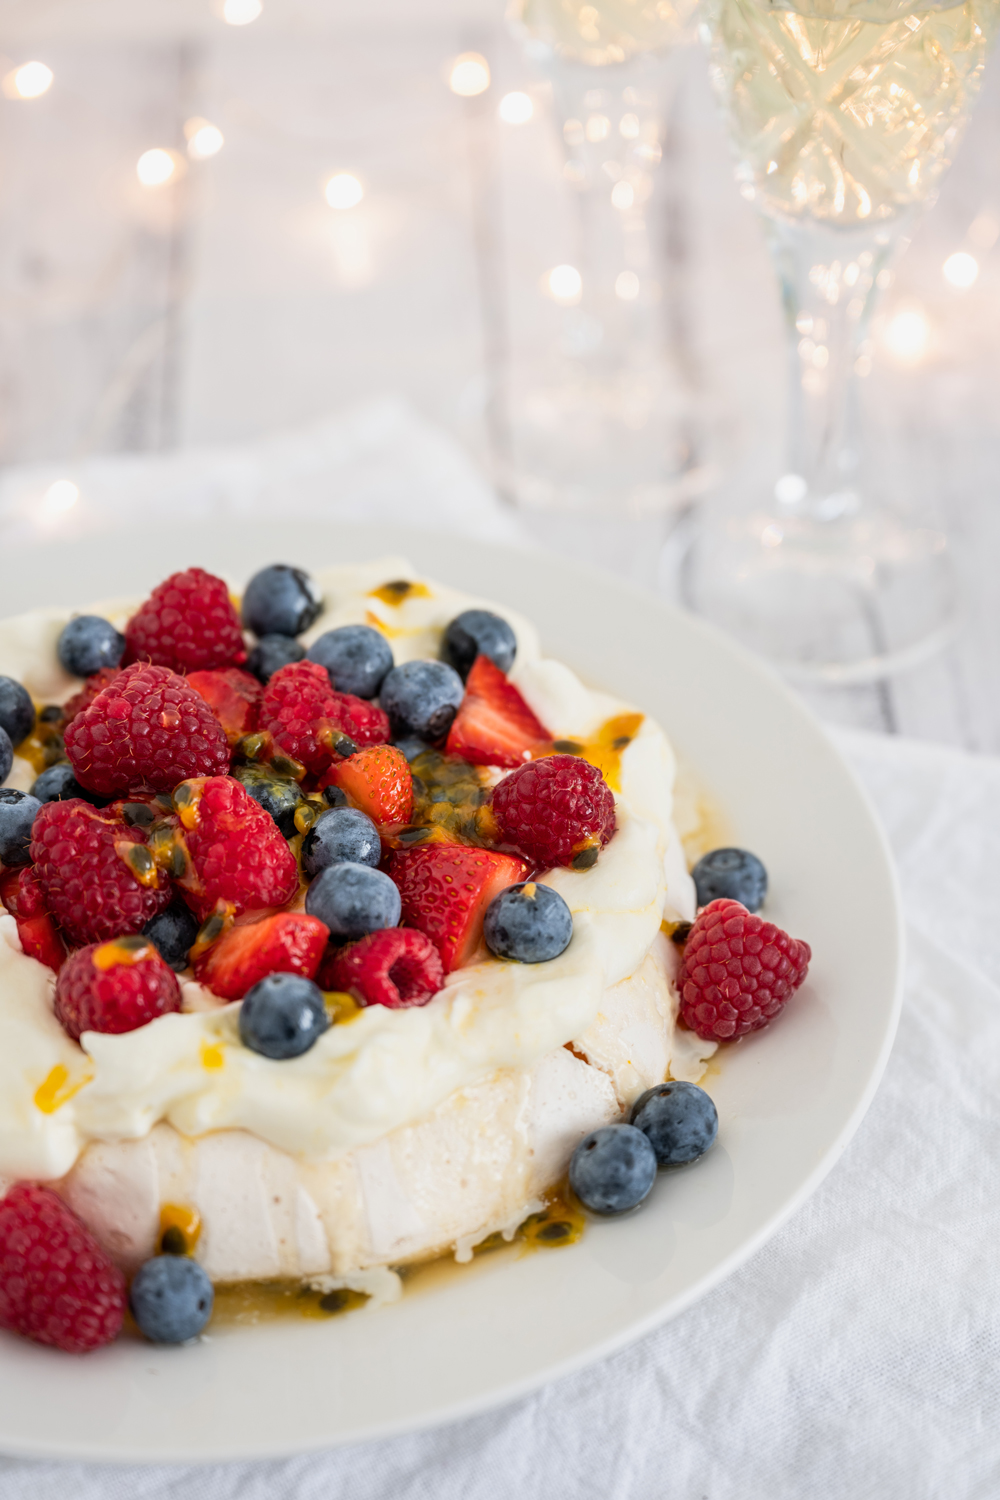 Christmas pavlova is safe to eat while pregnant